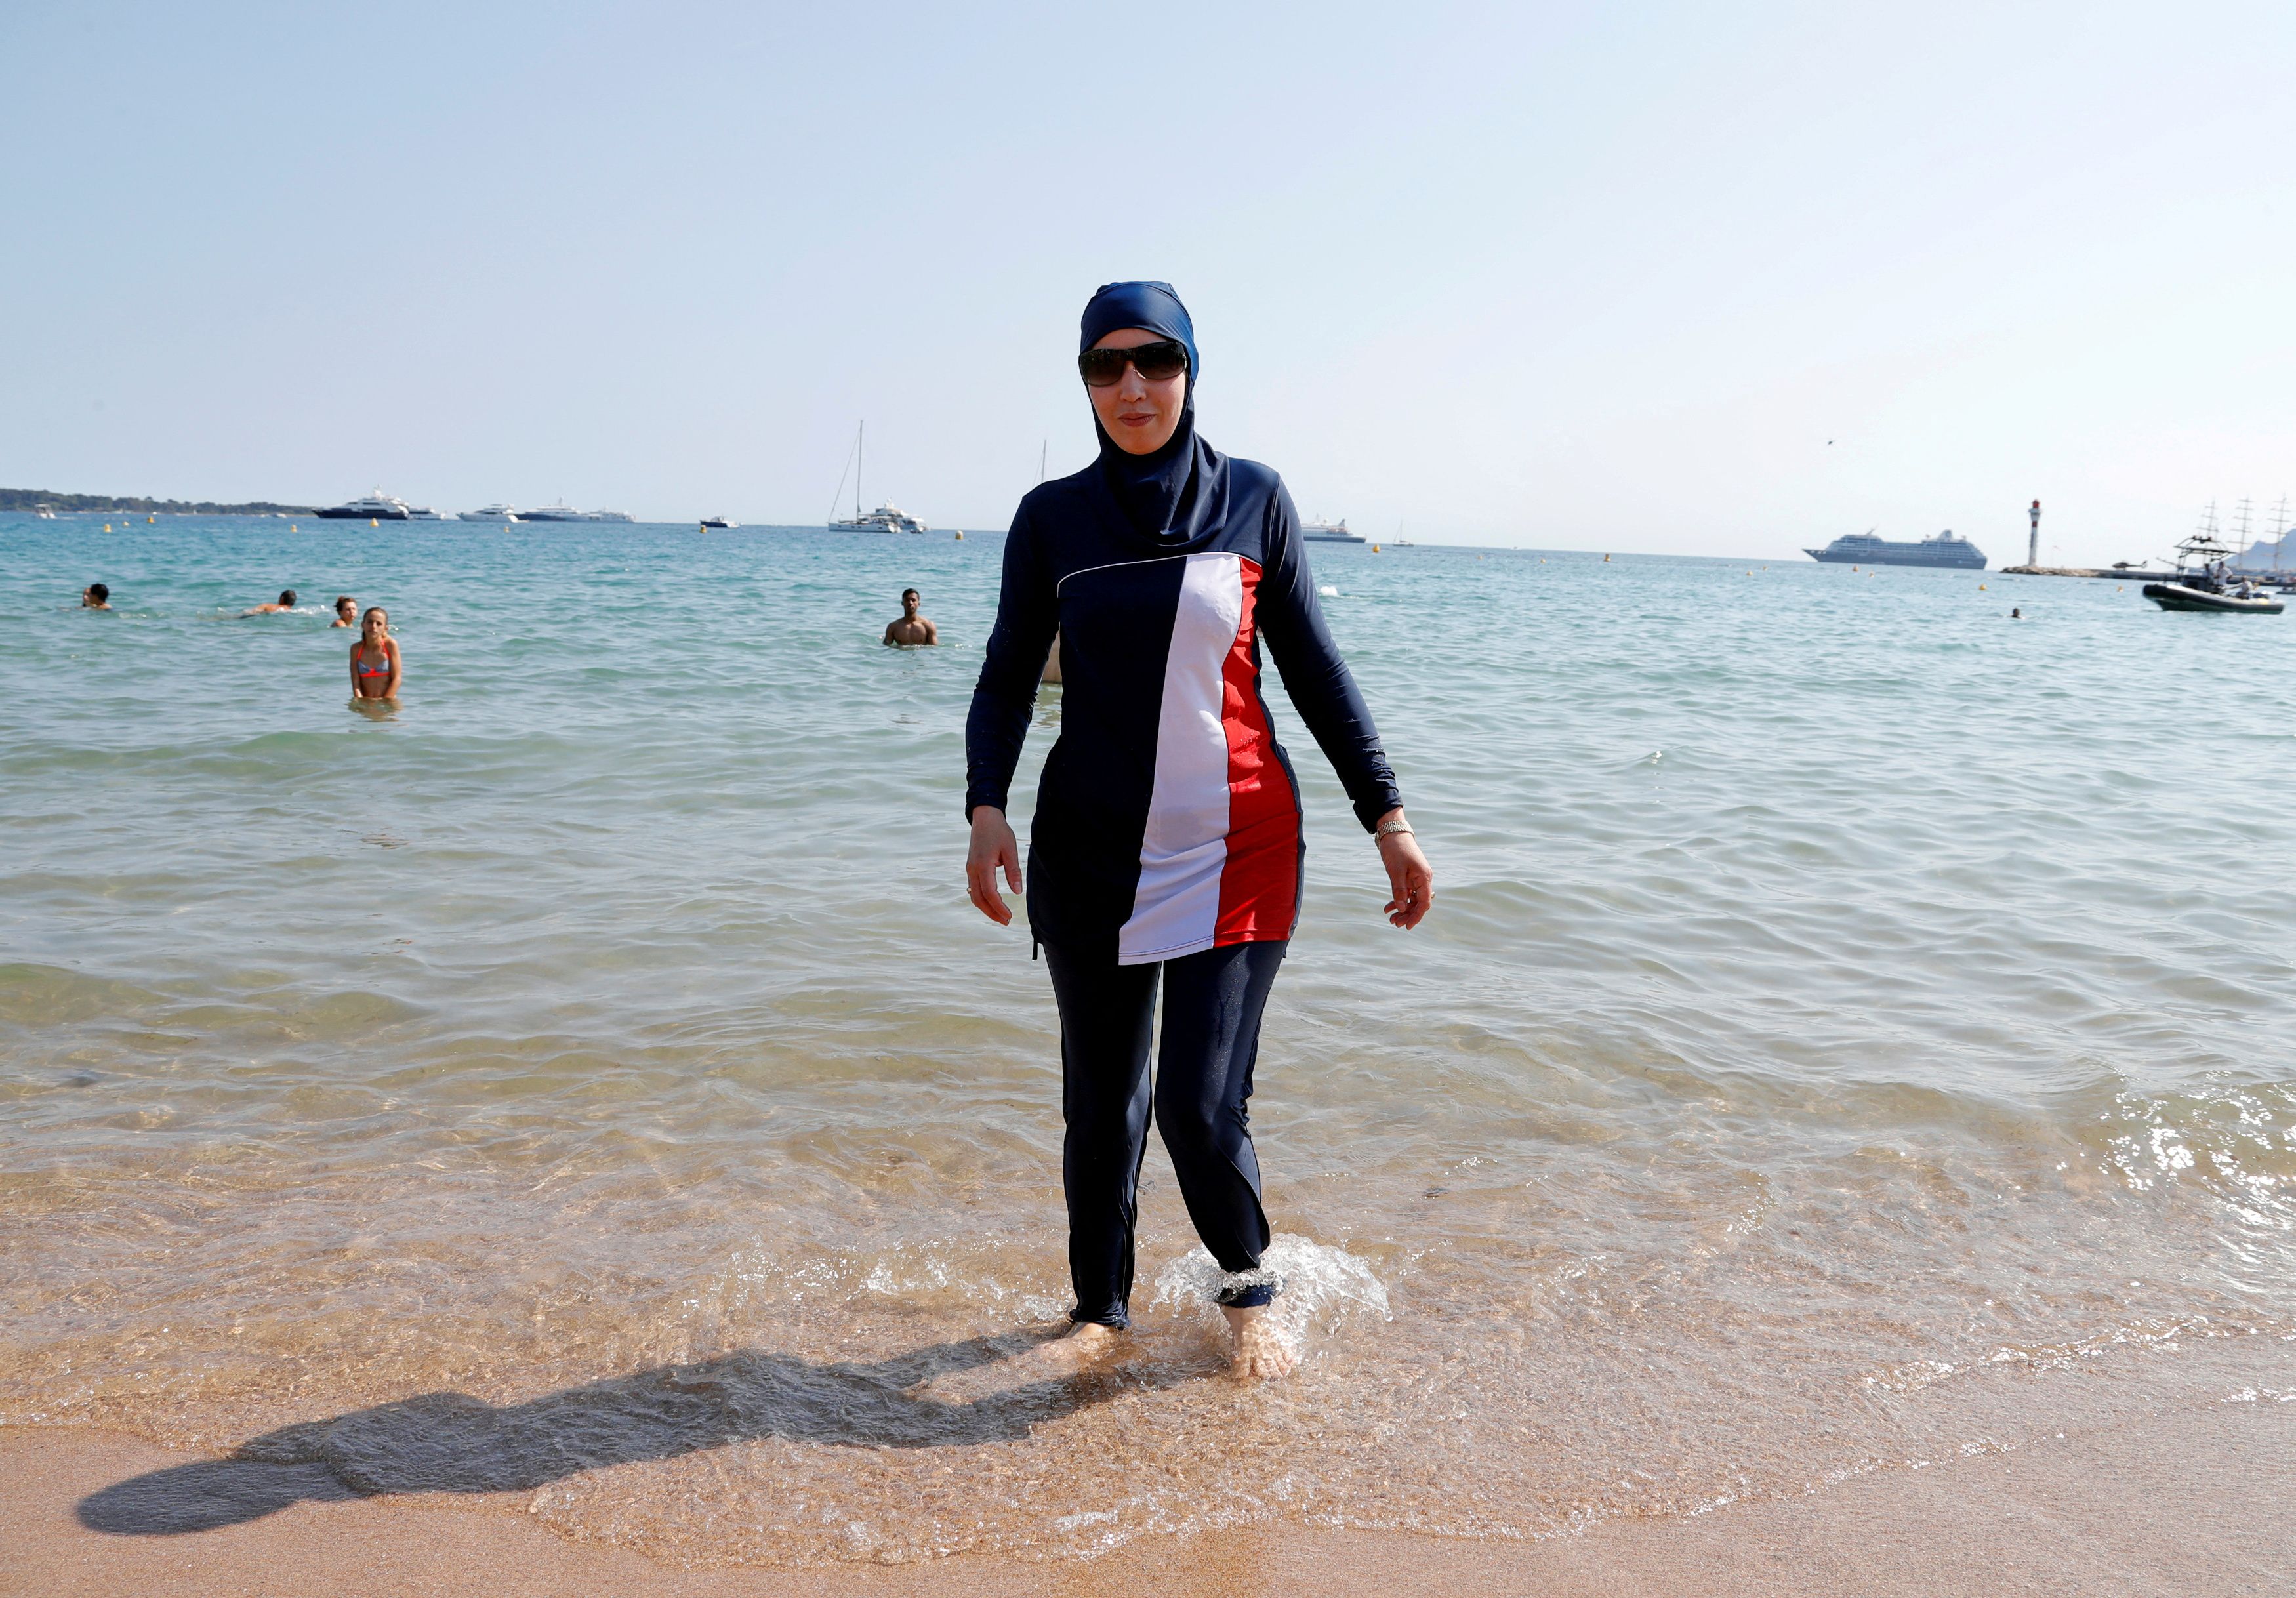 No place for burkinis in Grenoble public pools, rules top French